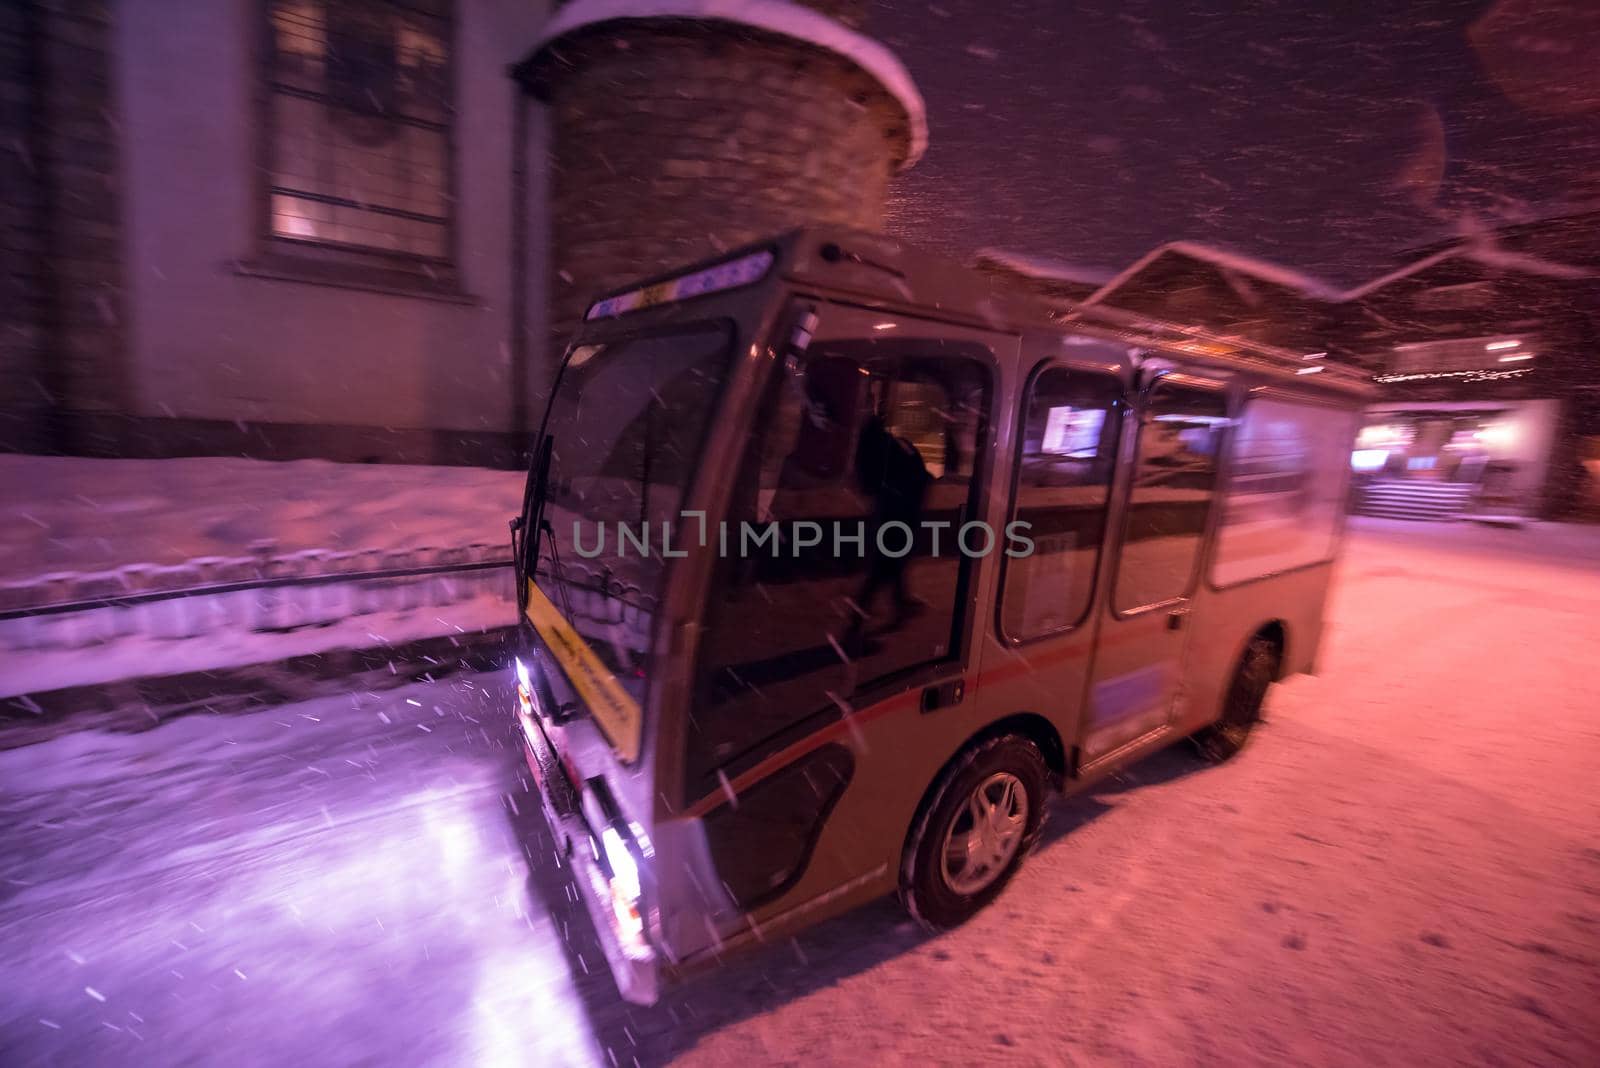 Electric taxi bus in the car-free holiday montain resort by dotshock